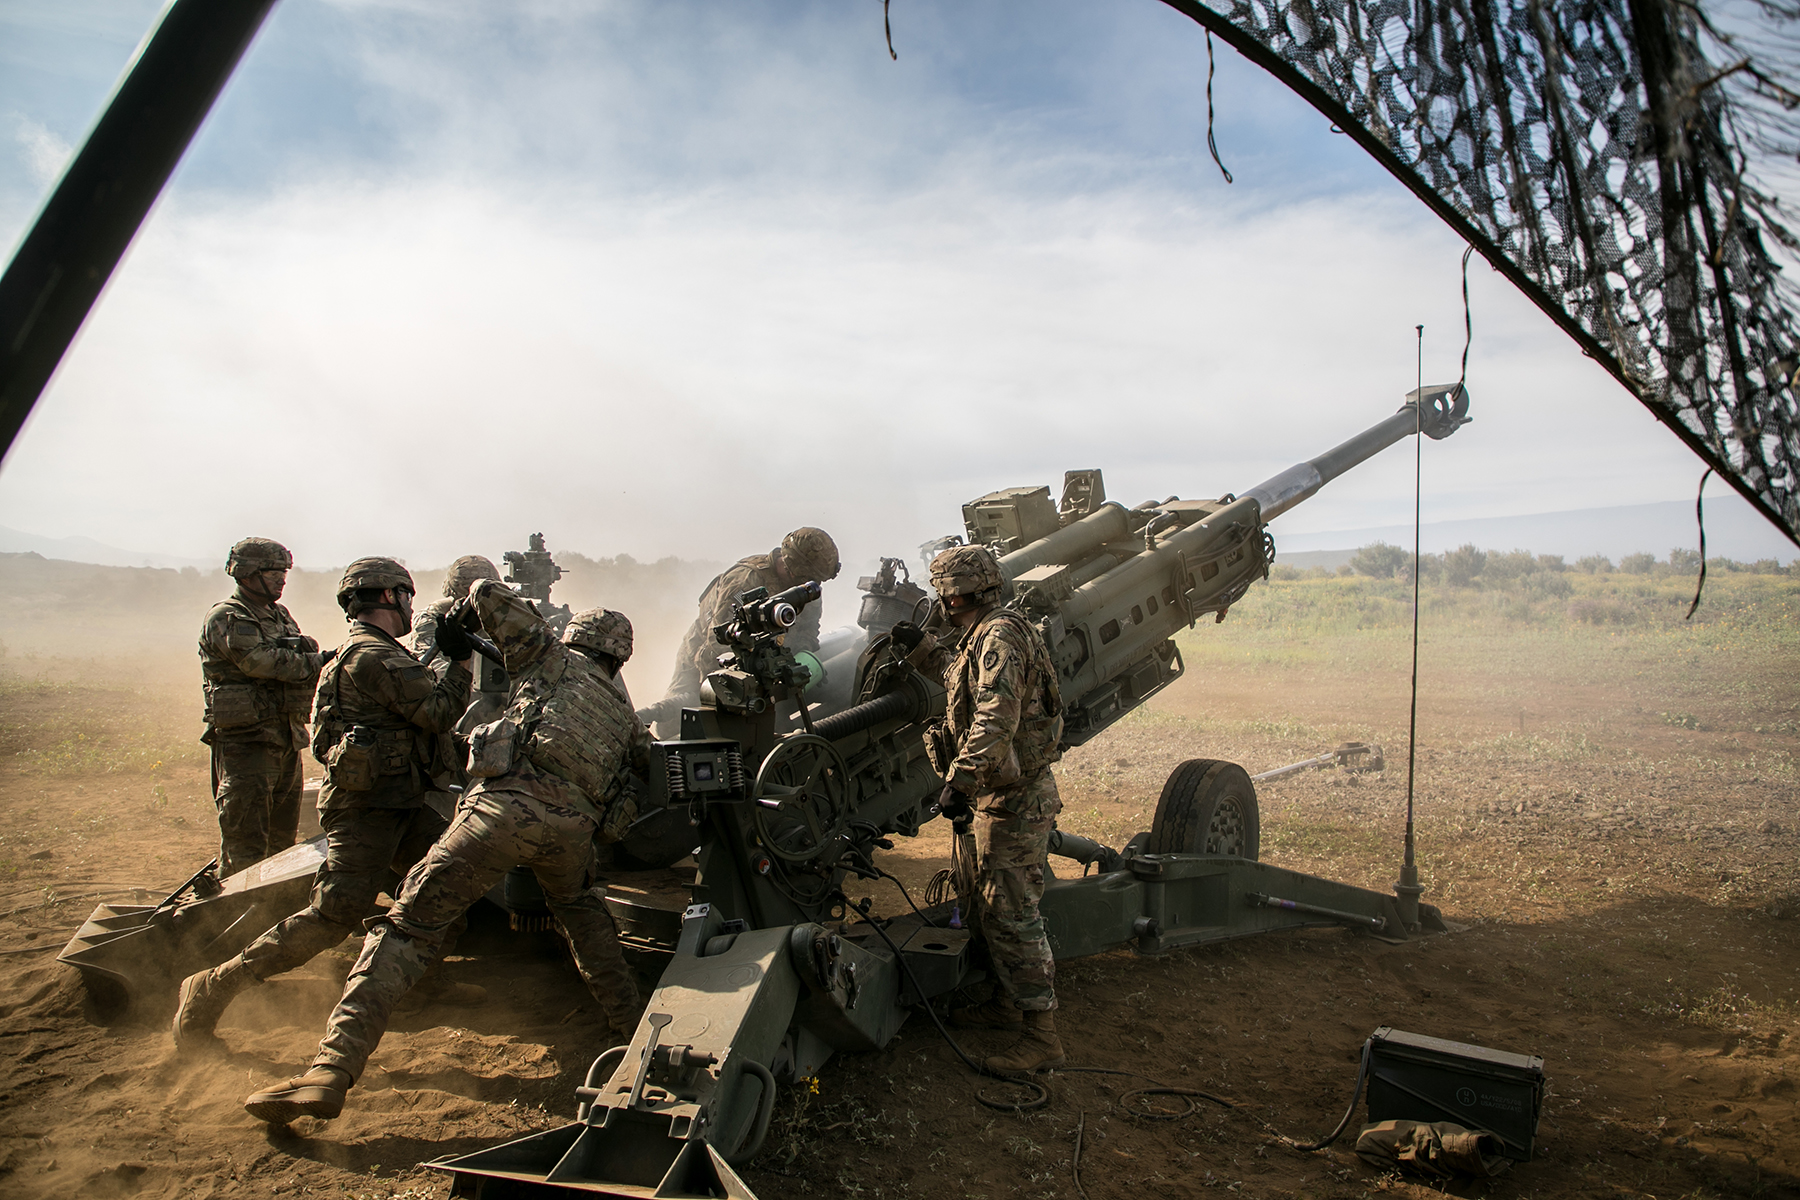 U.S soldiers operating a weapon.